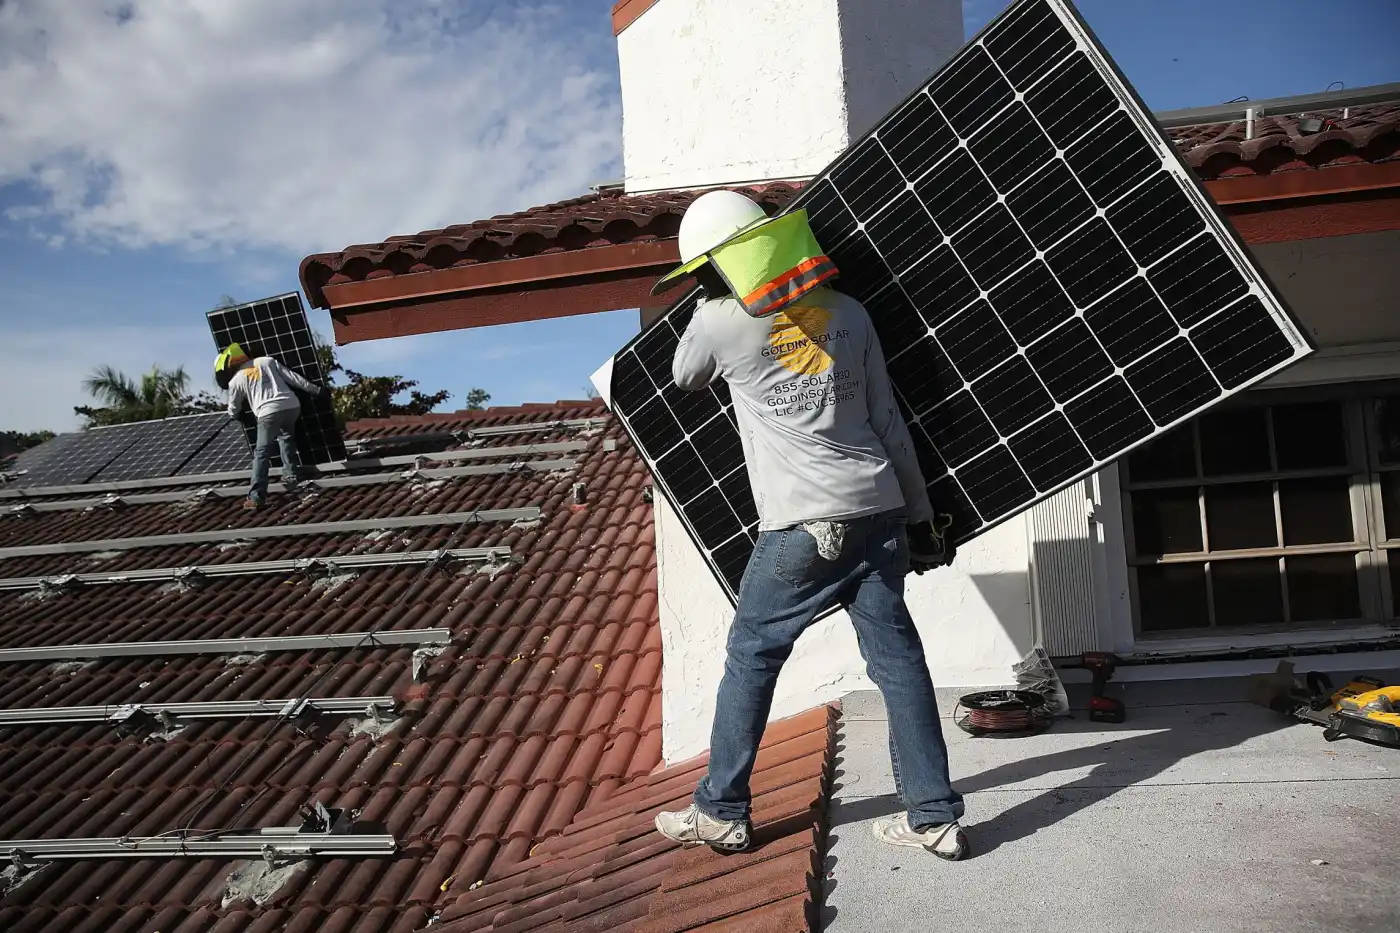 A worker fits solar panels in Florida. In April, the G7 pledged to increase offshore wind capacity by 150GW by 2030 and solar capacity to more than 1 terawatt © Joe Raedle/Getty Images